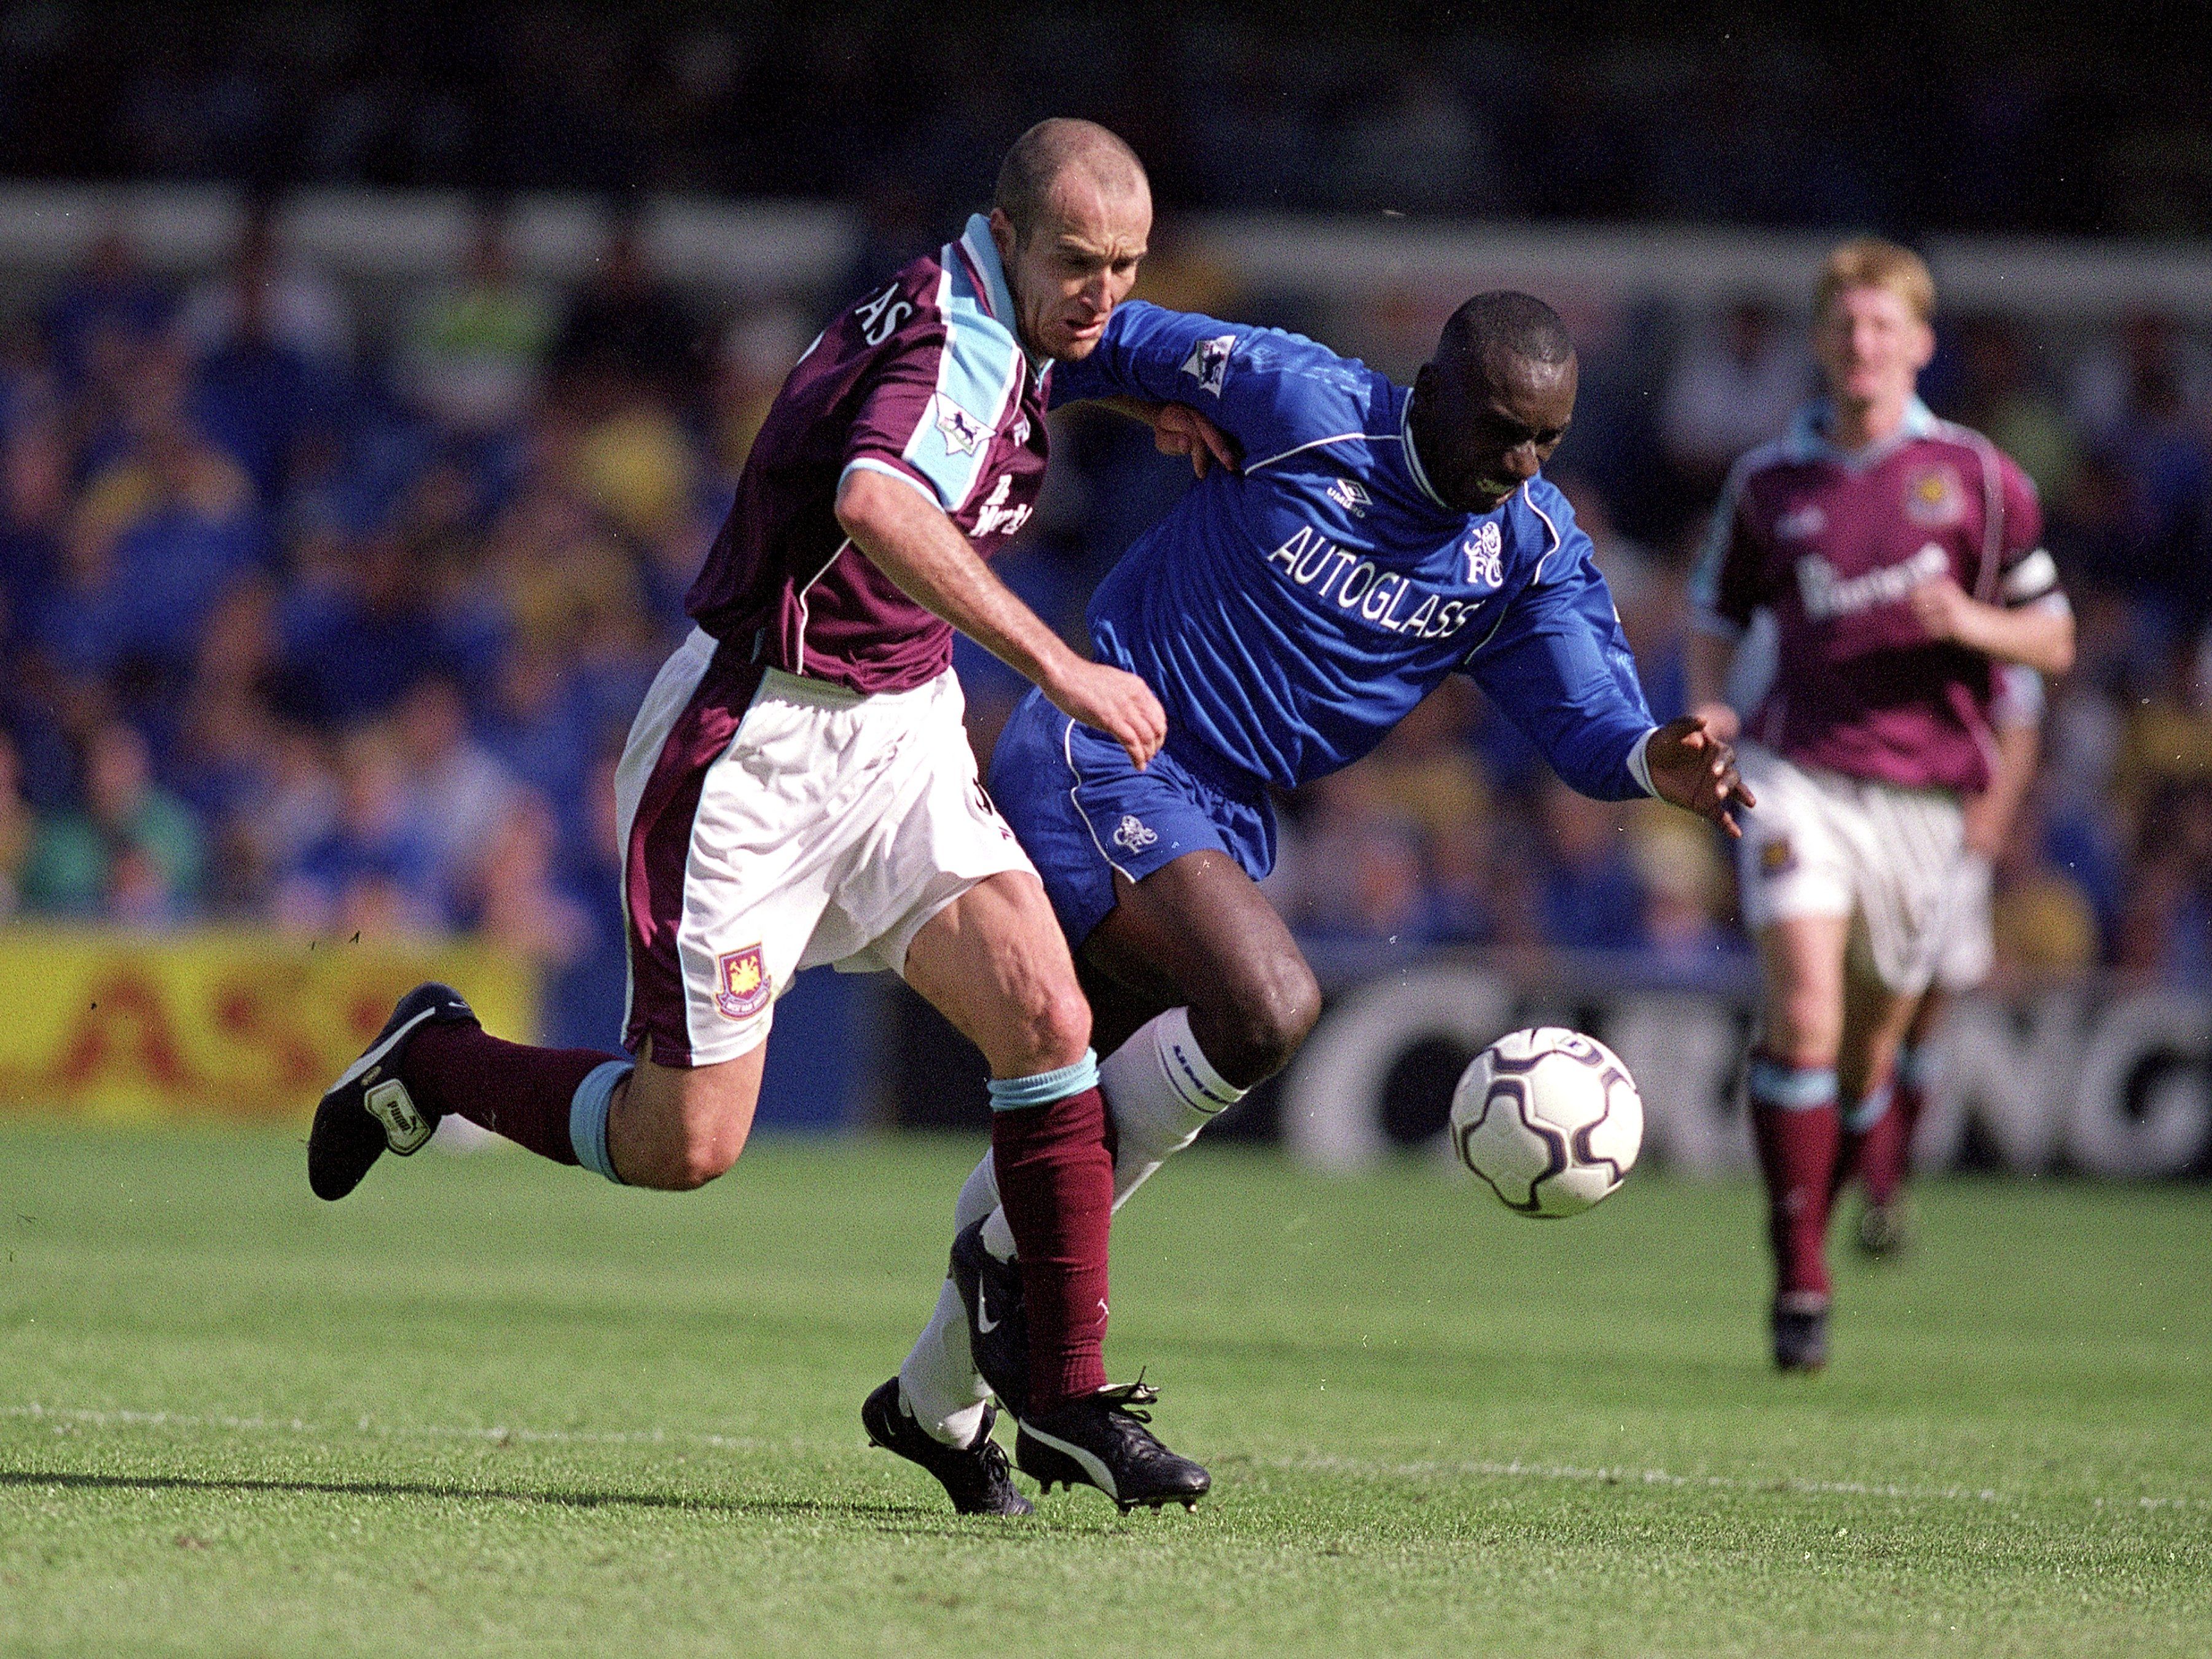 Javier Margas in action for West Ham